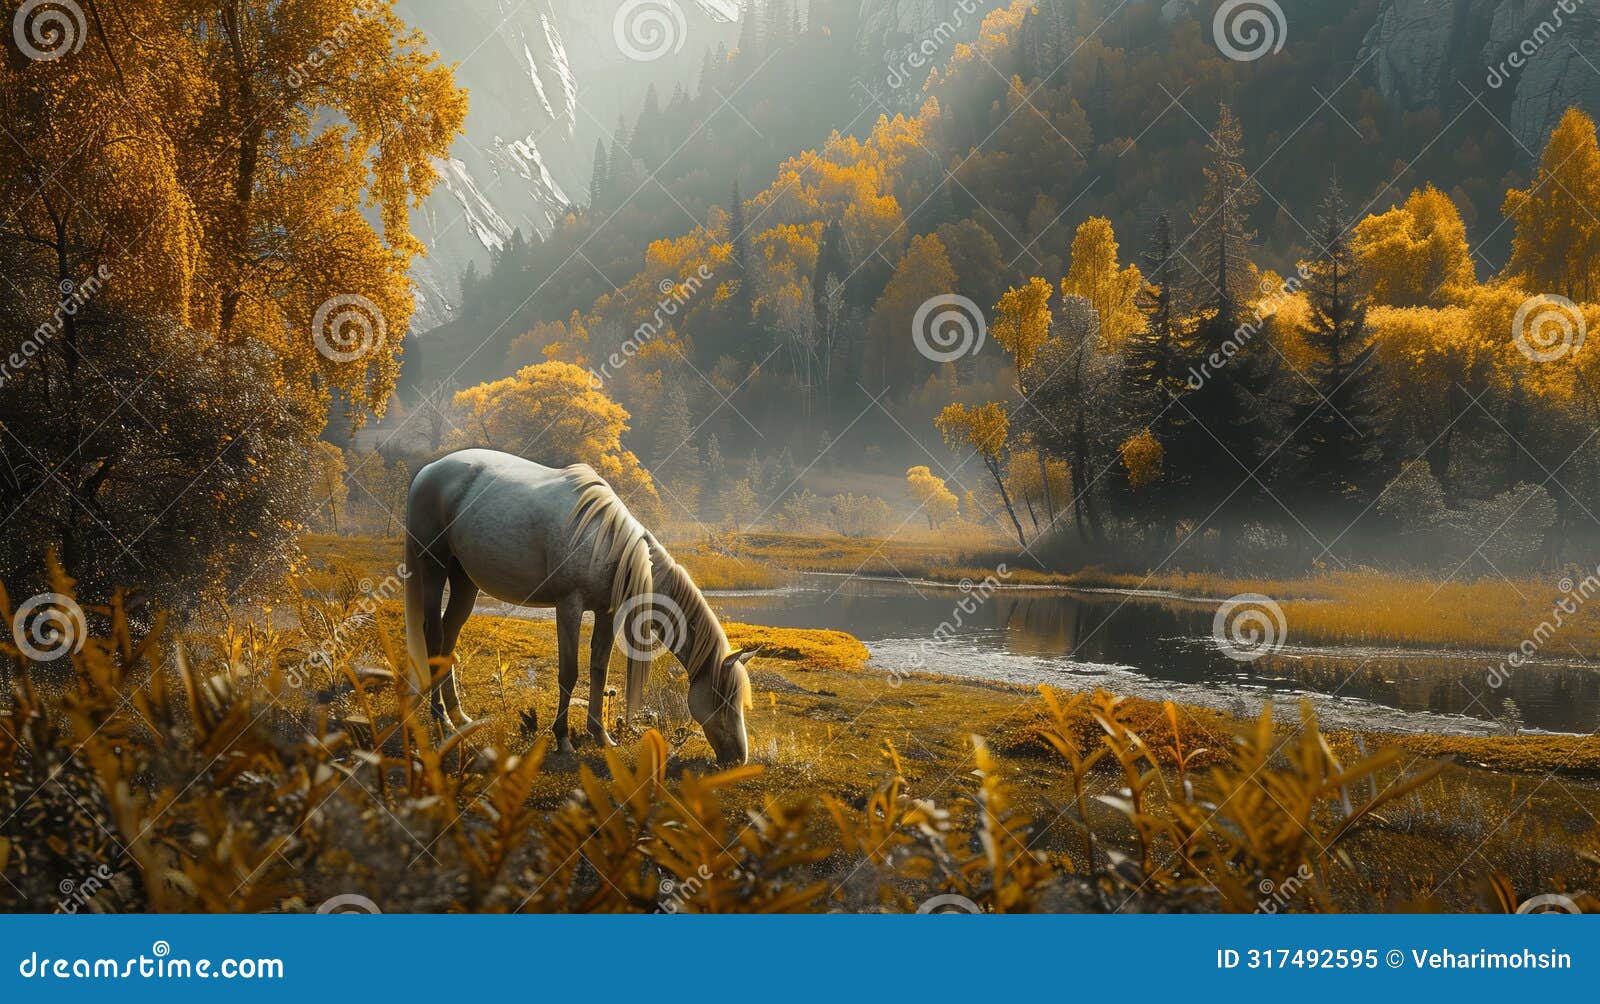 horse grazes in meadow, surrounded by nature